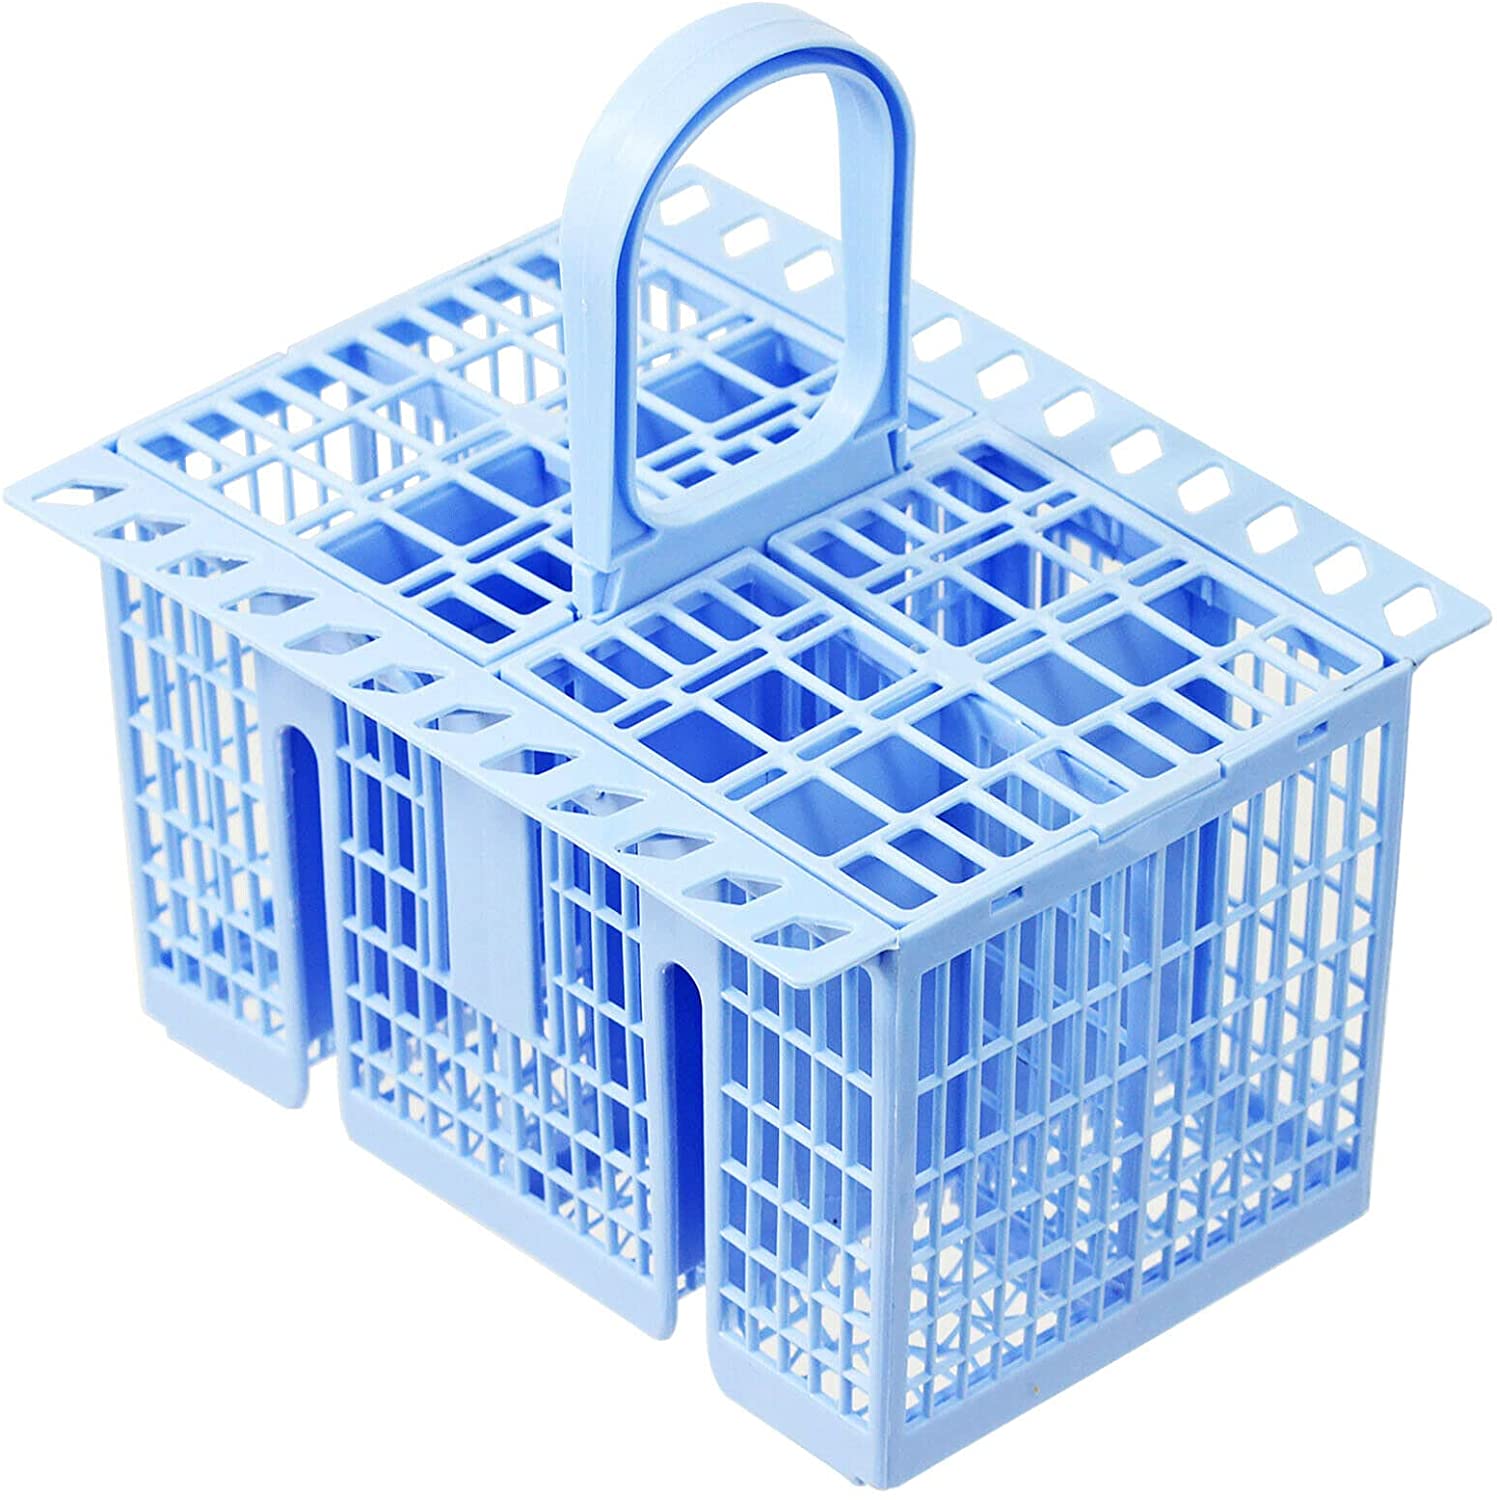 SPARES2GO Cutlery Basket compatible with Baumatic Dishwasher (Blue, 220 x 208 x 160mm)